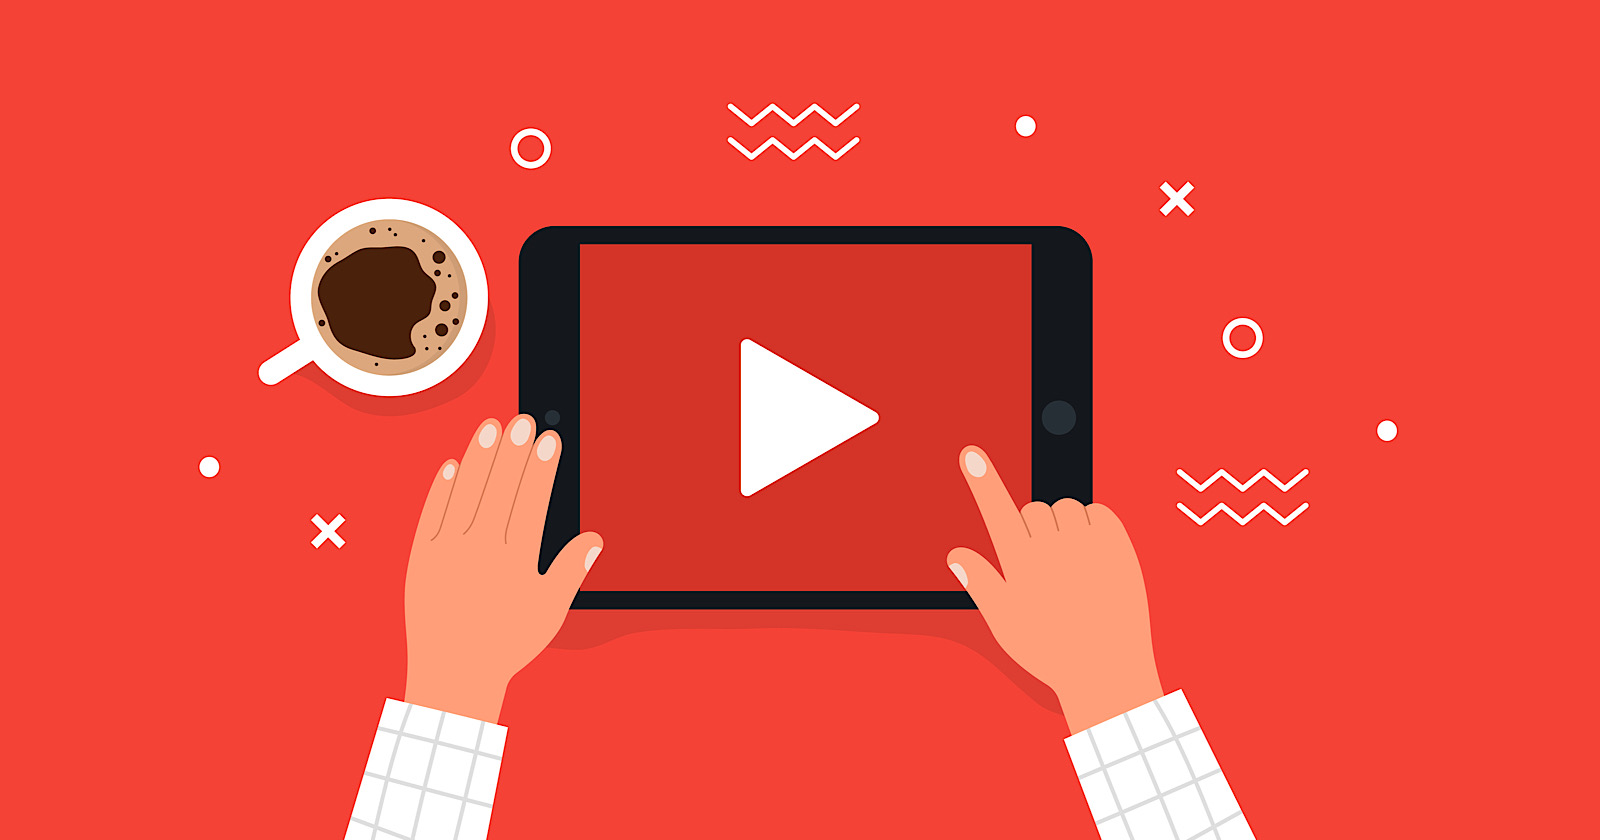 YouTube Marketing: The Complete Guide to Marketing Your Business On YouTube